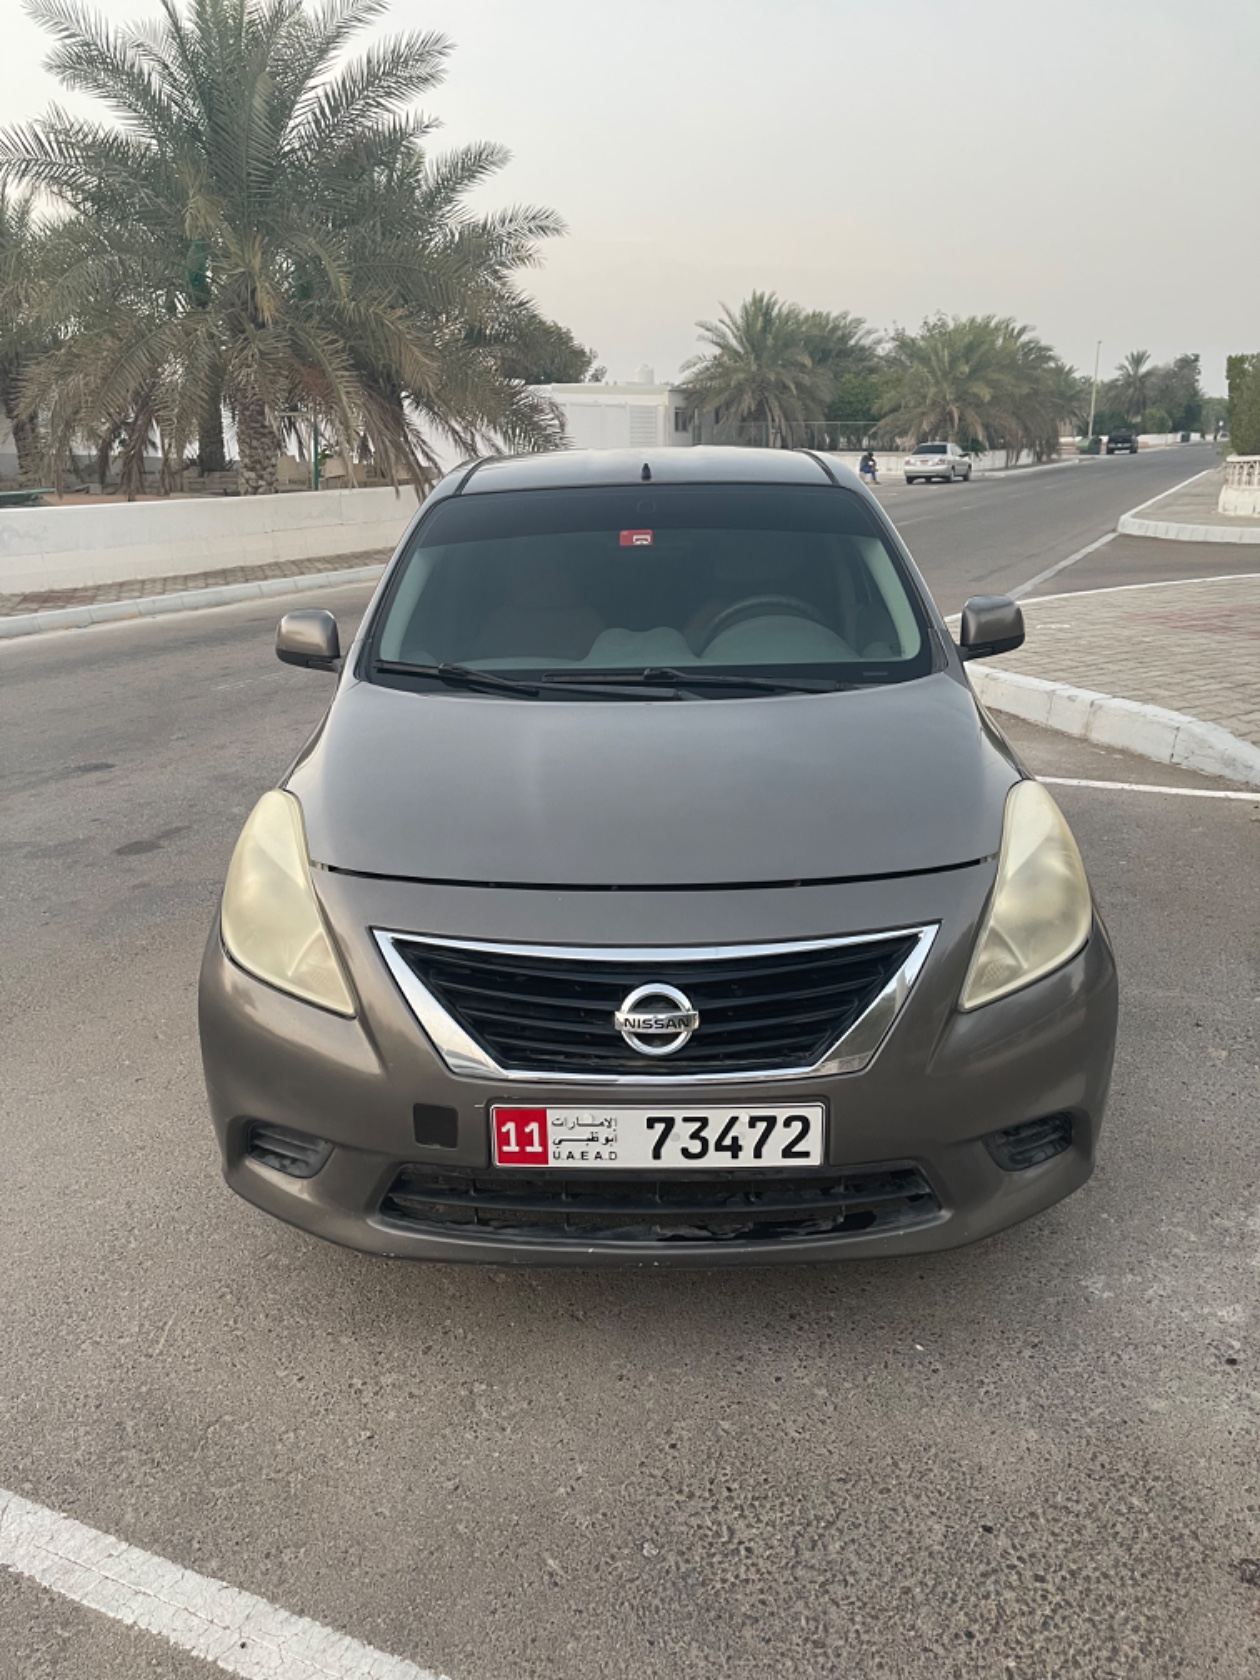 Affordable and Reliable - The 2014 Nissan Sunny